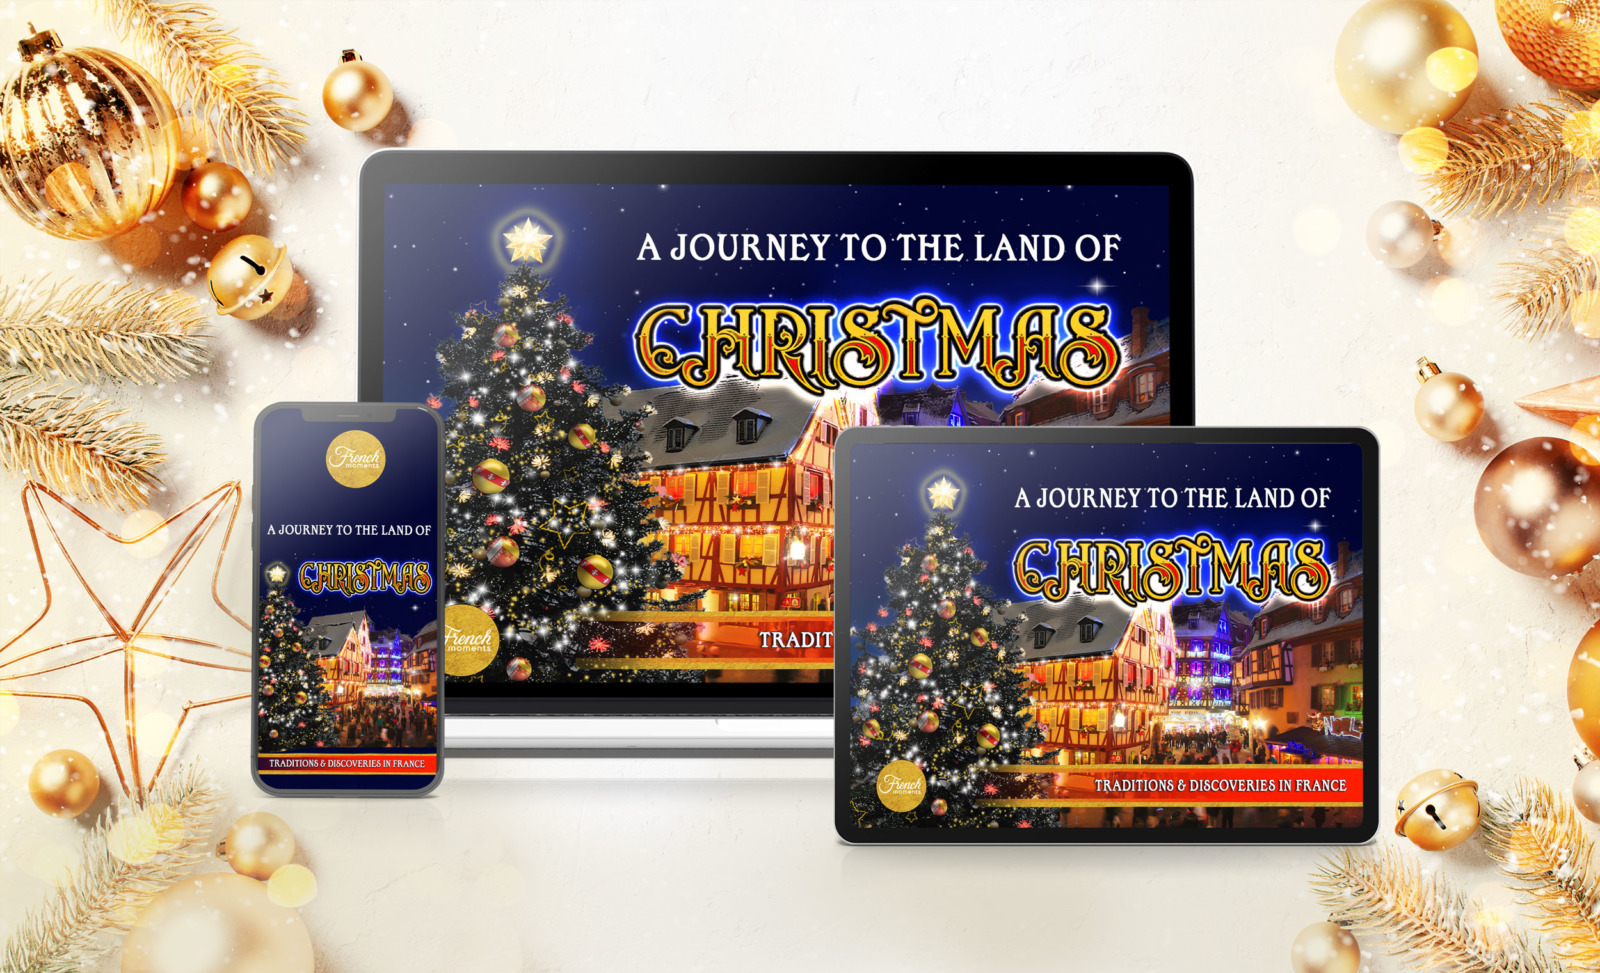 Christmas in France ebook - A Journey to the Land of Christmas